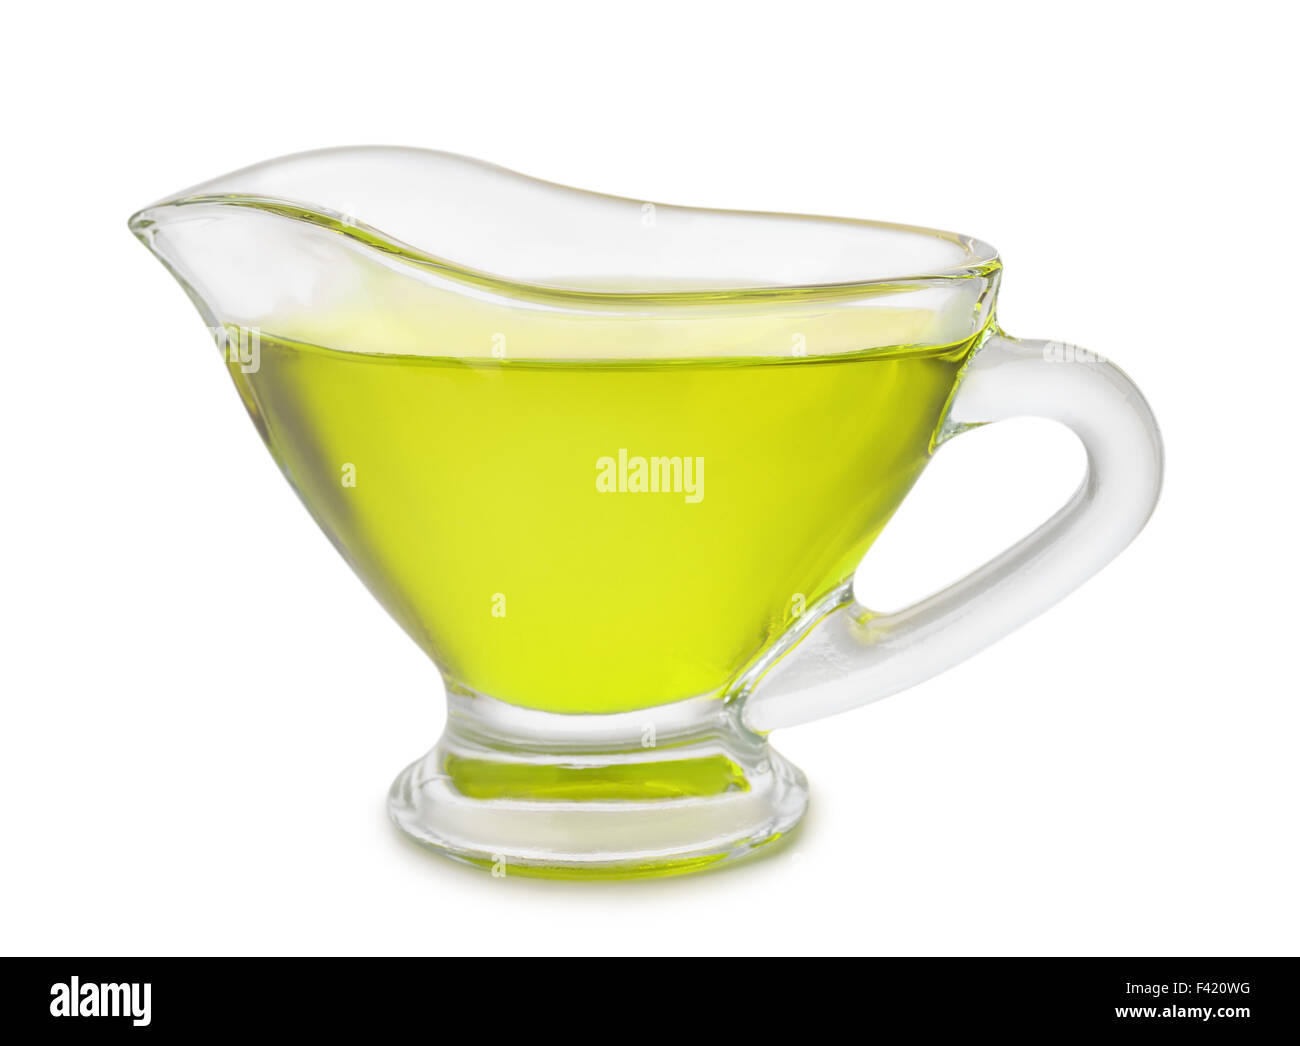 Gravy boat of olive oil isolated on white Stock Photo